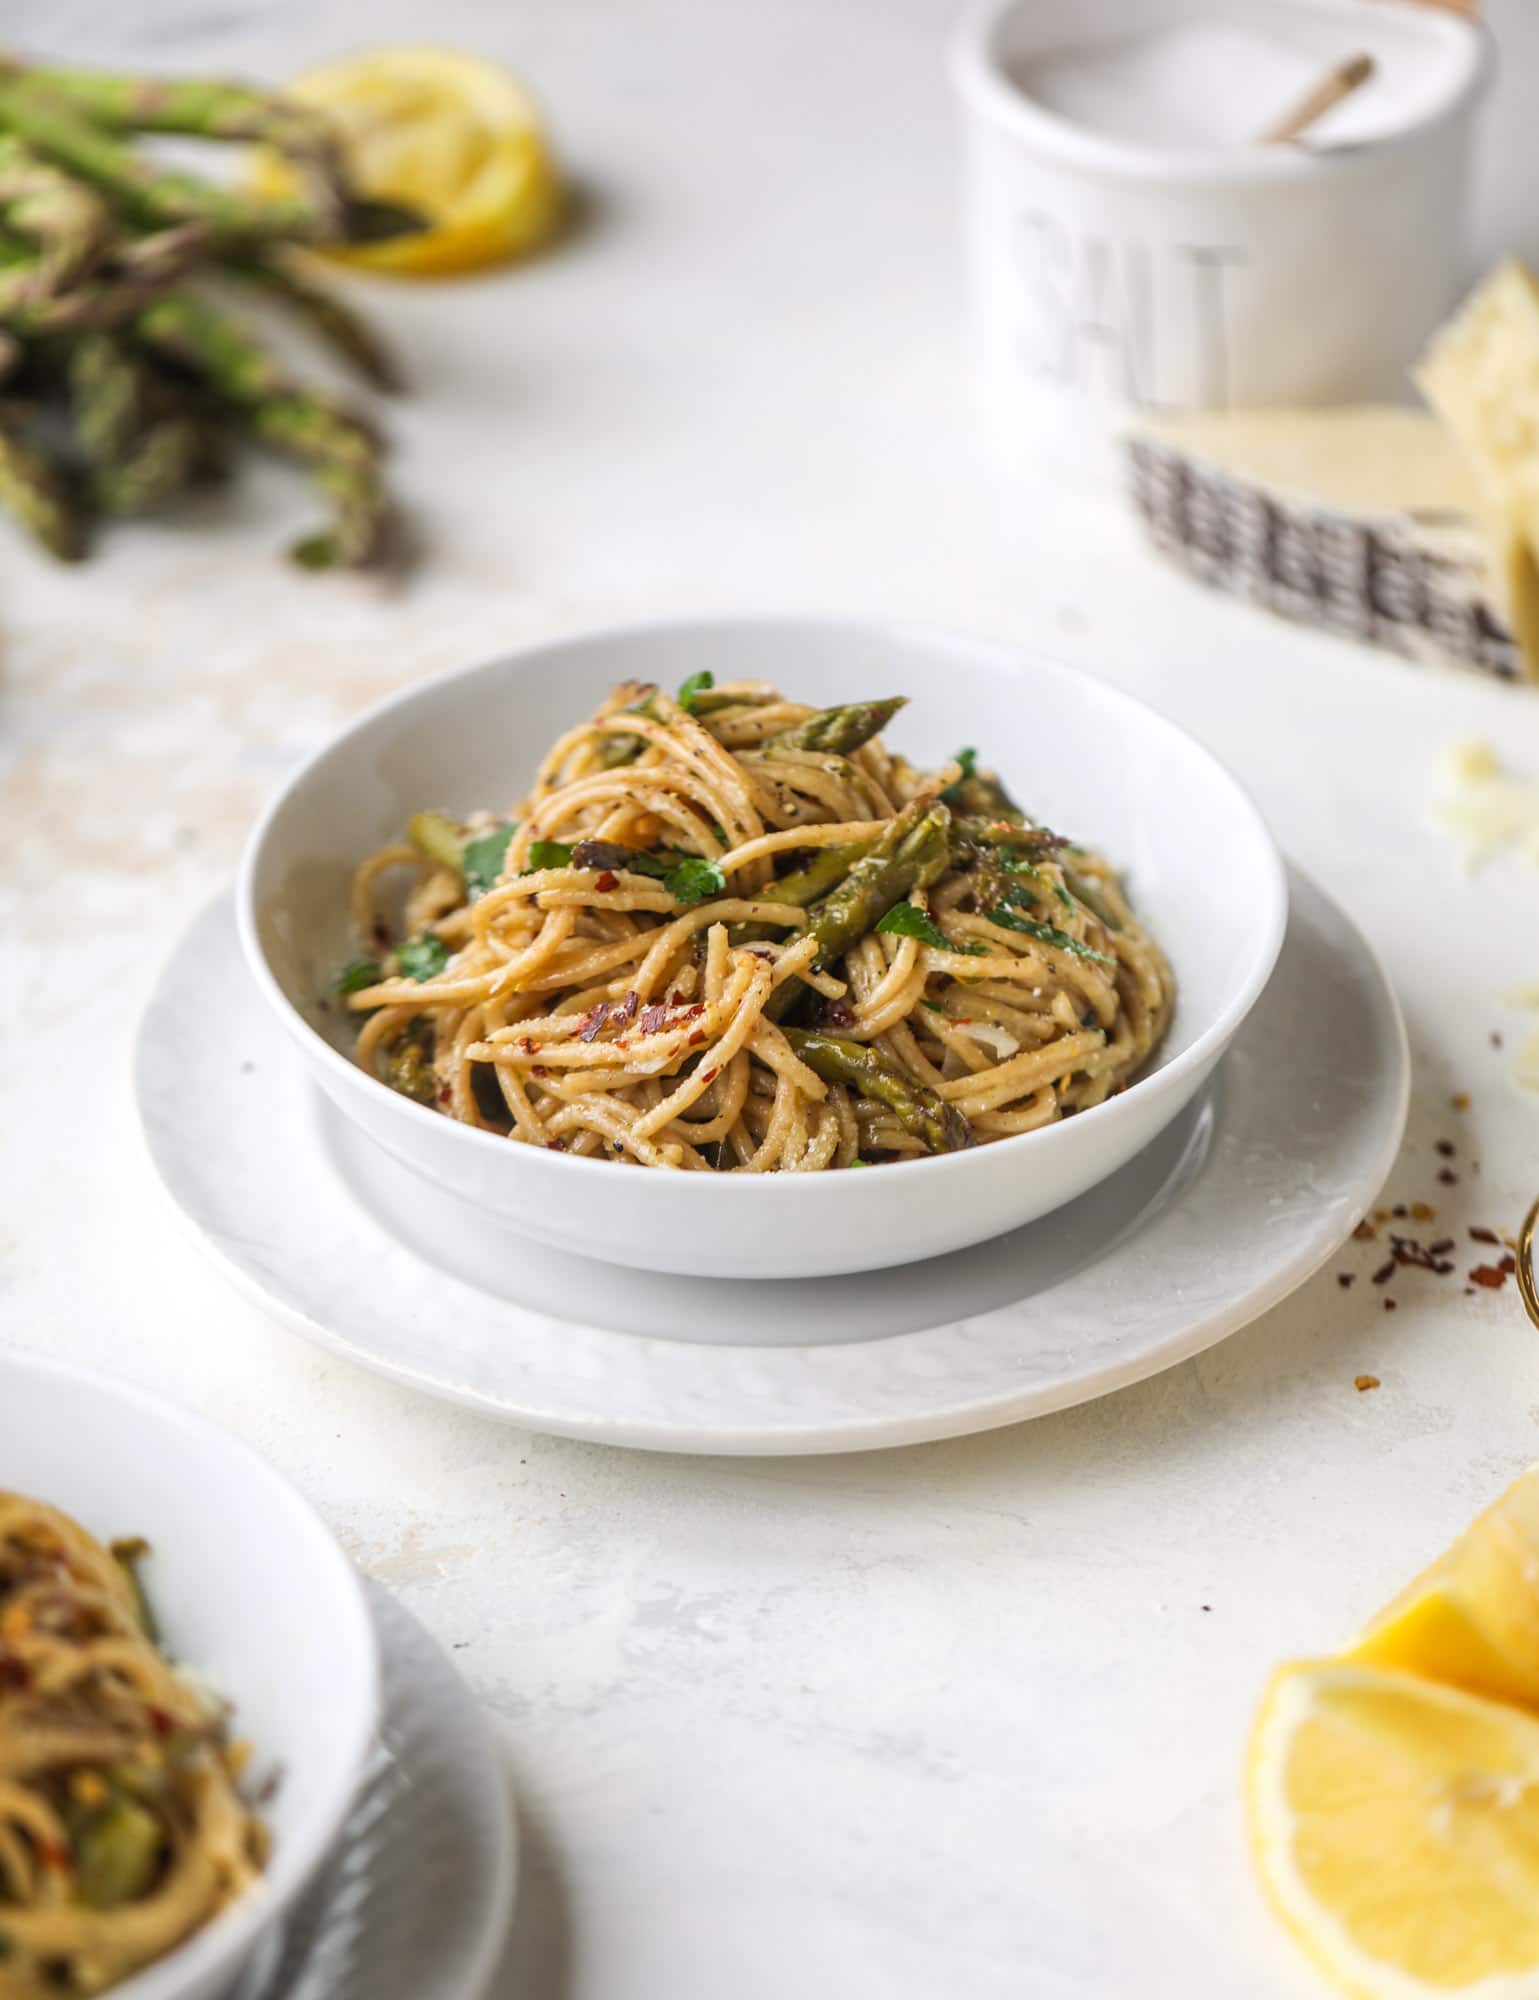 A perfect one pot pasta made with asparagus, shallots, lemon and mascarpone chese. The best weeknight dinner that comes together in a snap! I howsweeteats.com #asparagus #onepotpasta